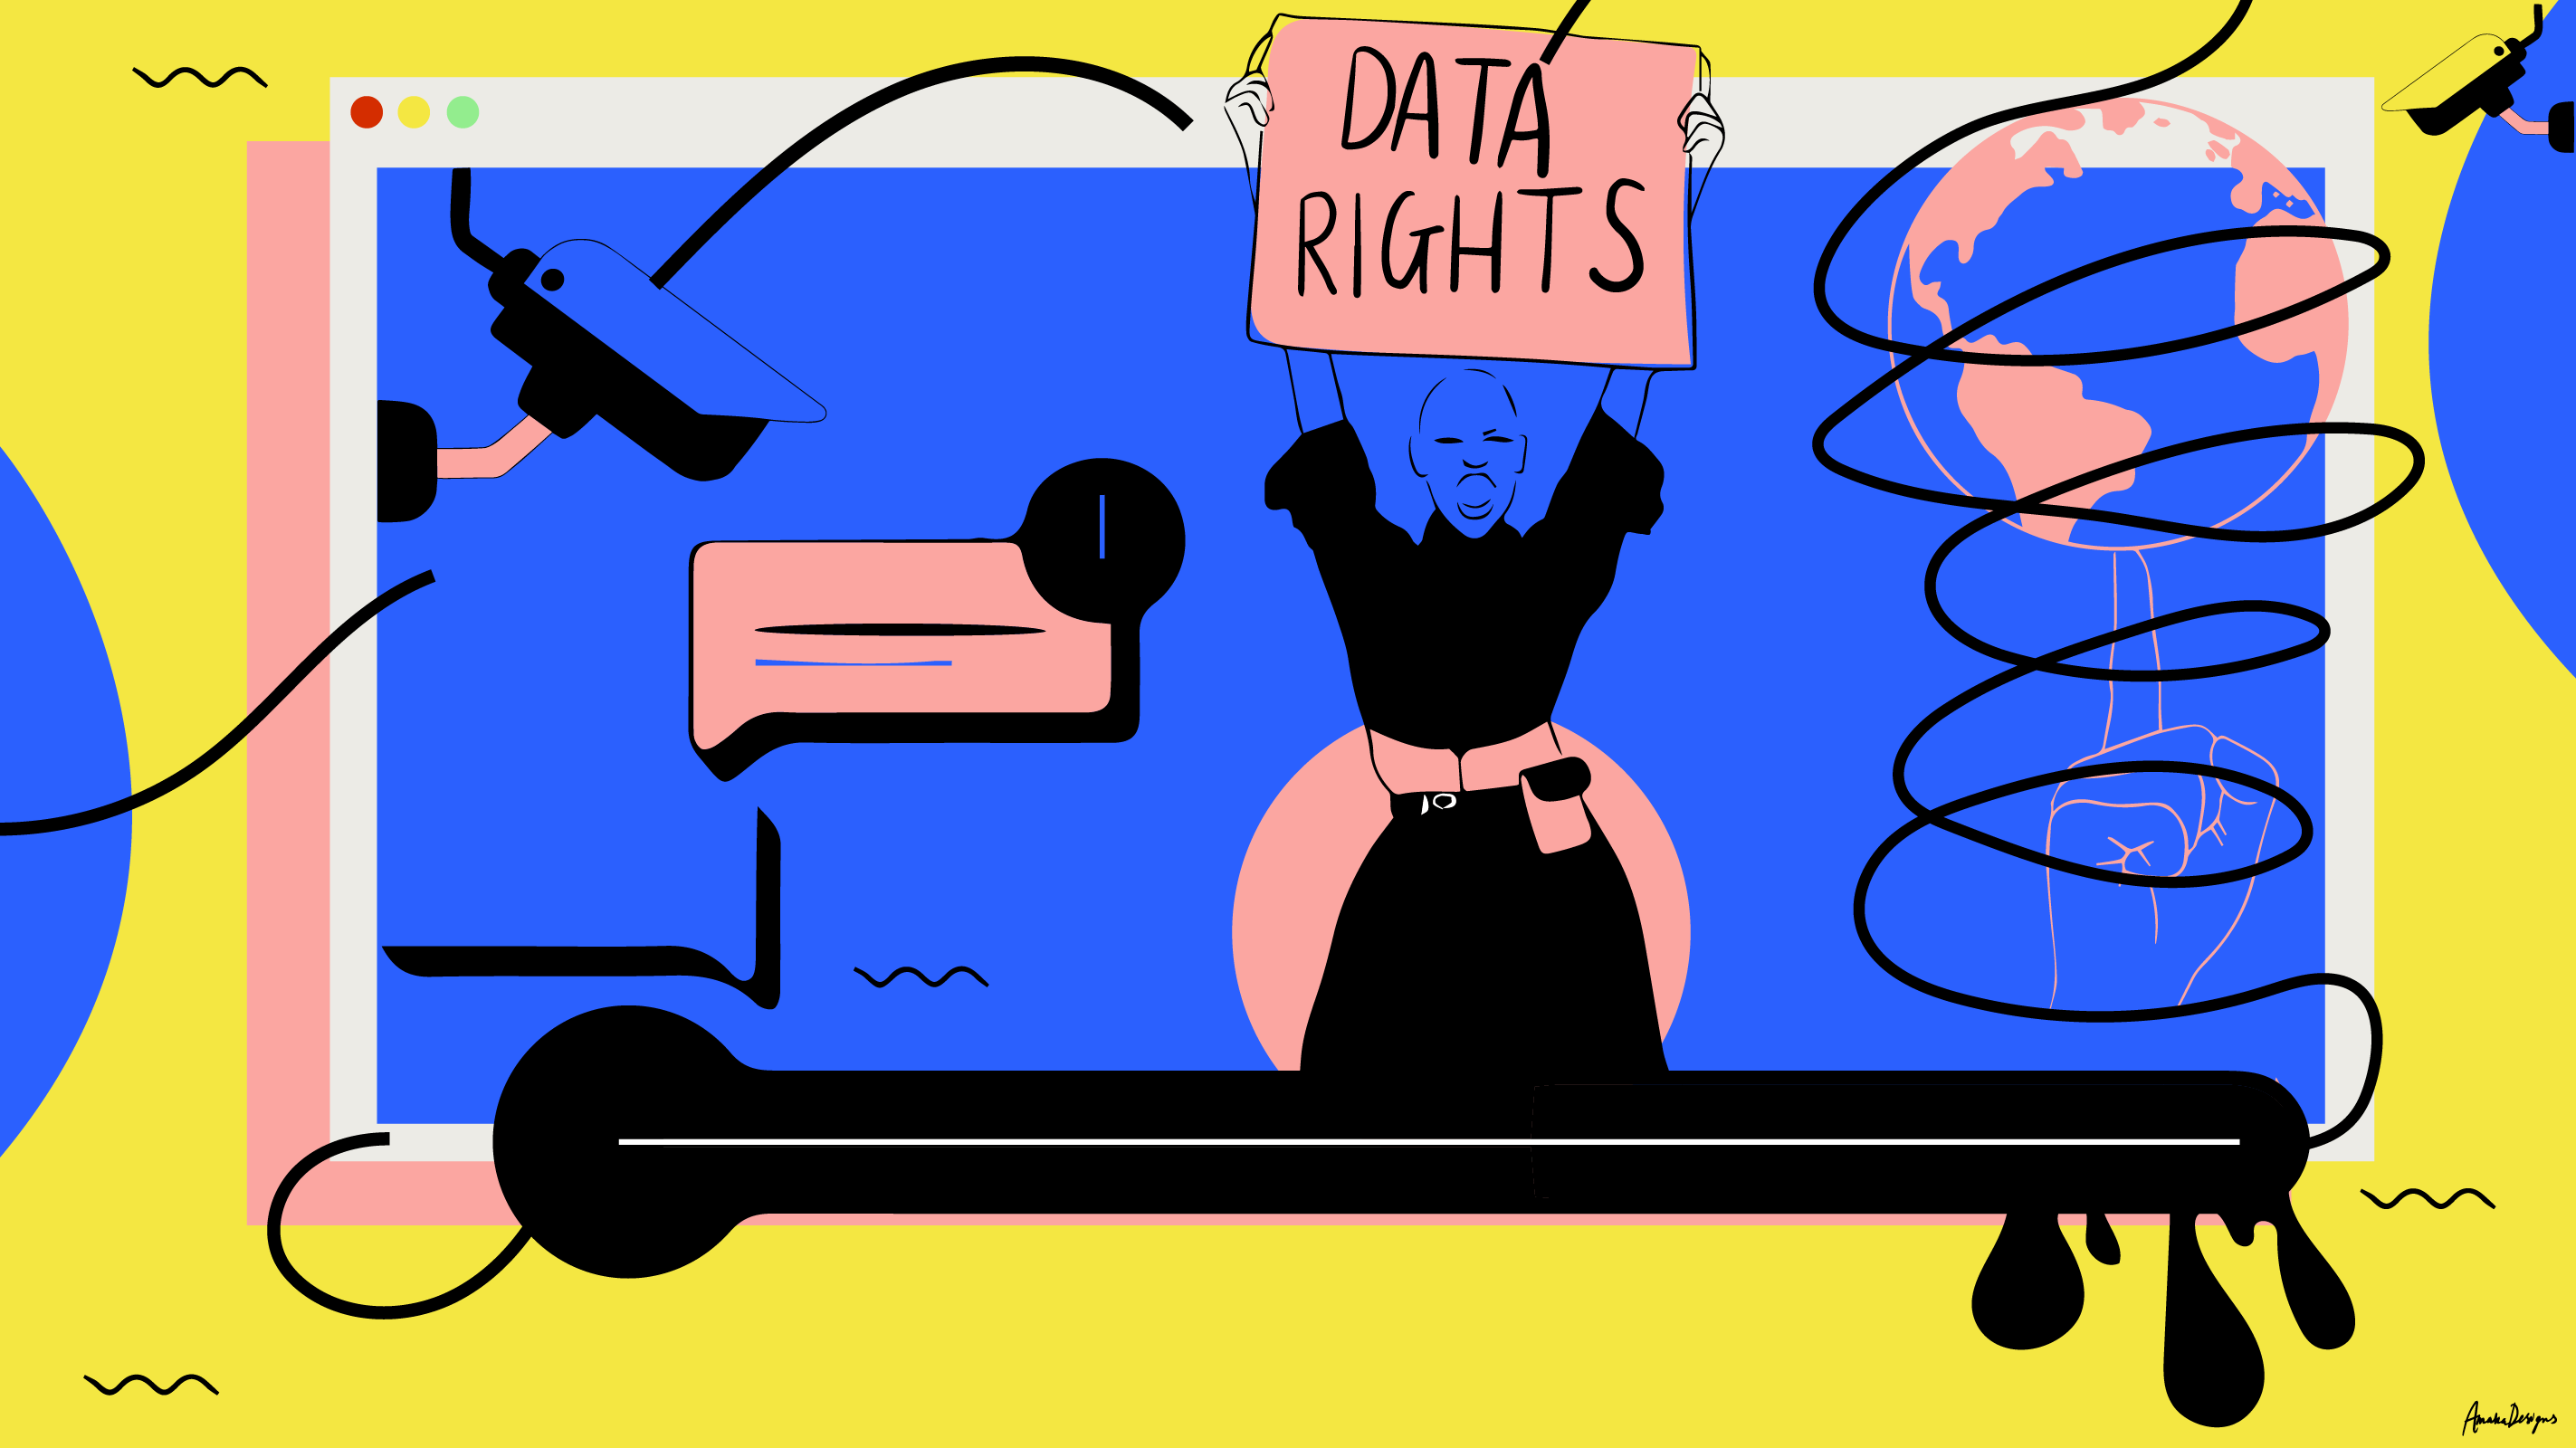 The-Fight-for-Data-Rights-Illustration-by-Stacey-Olika